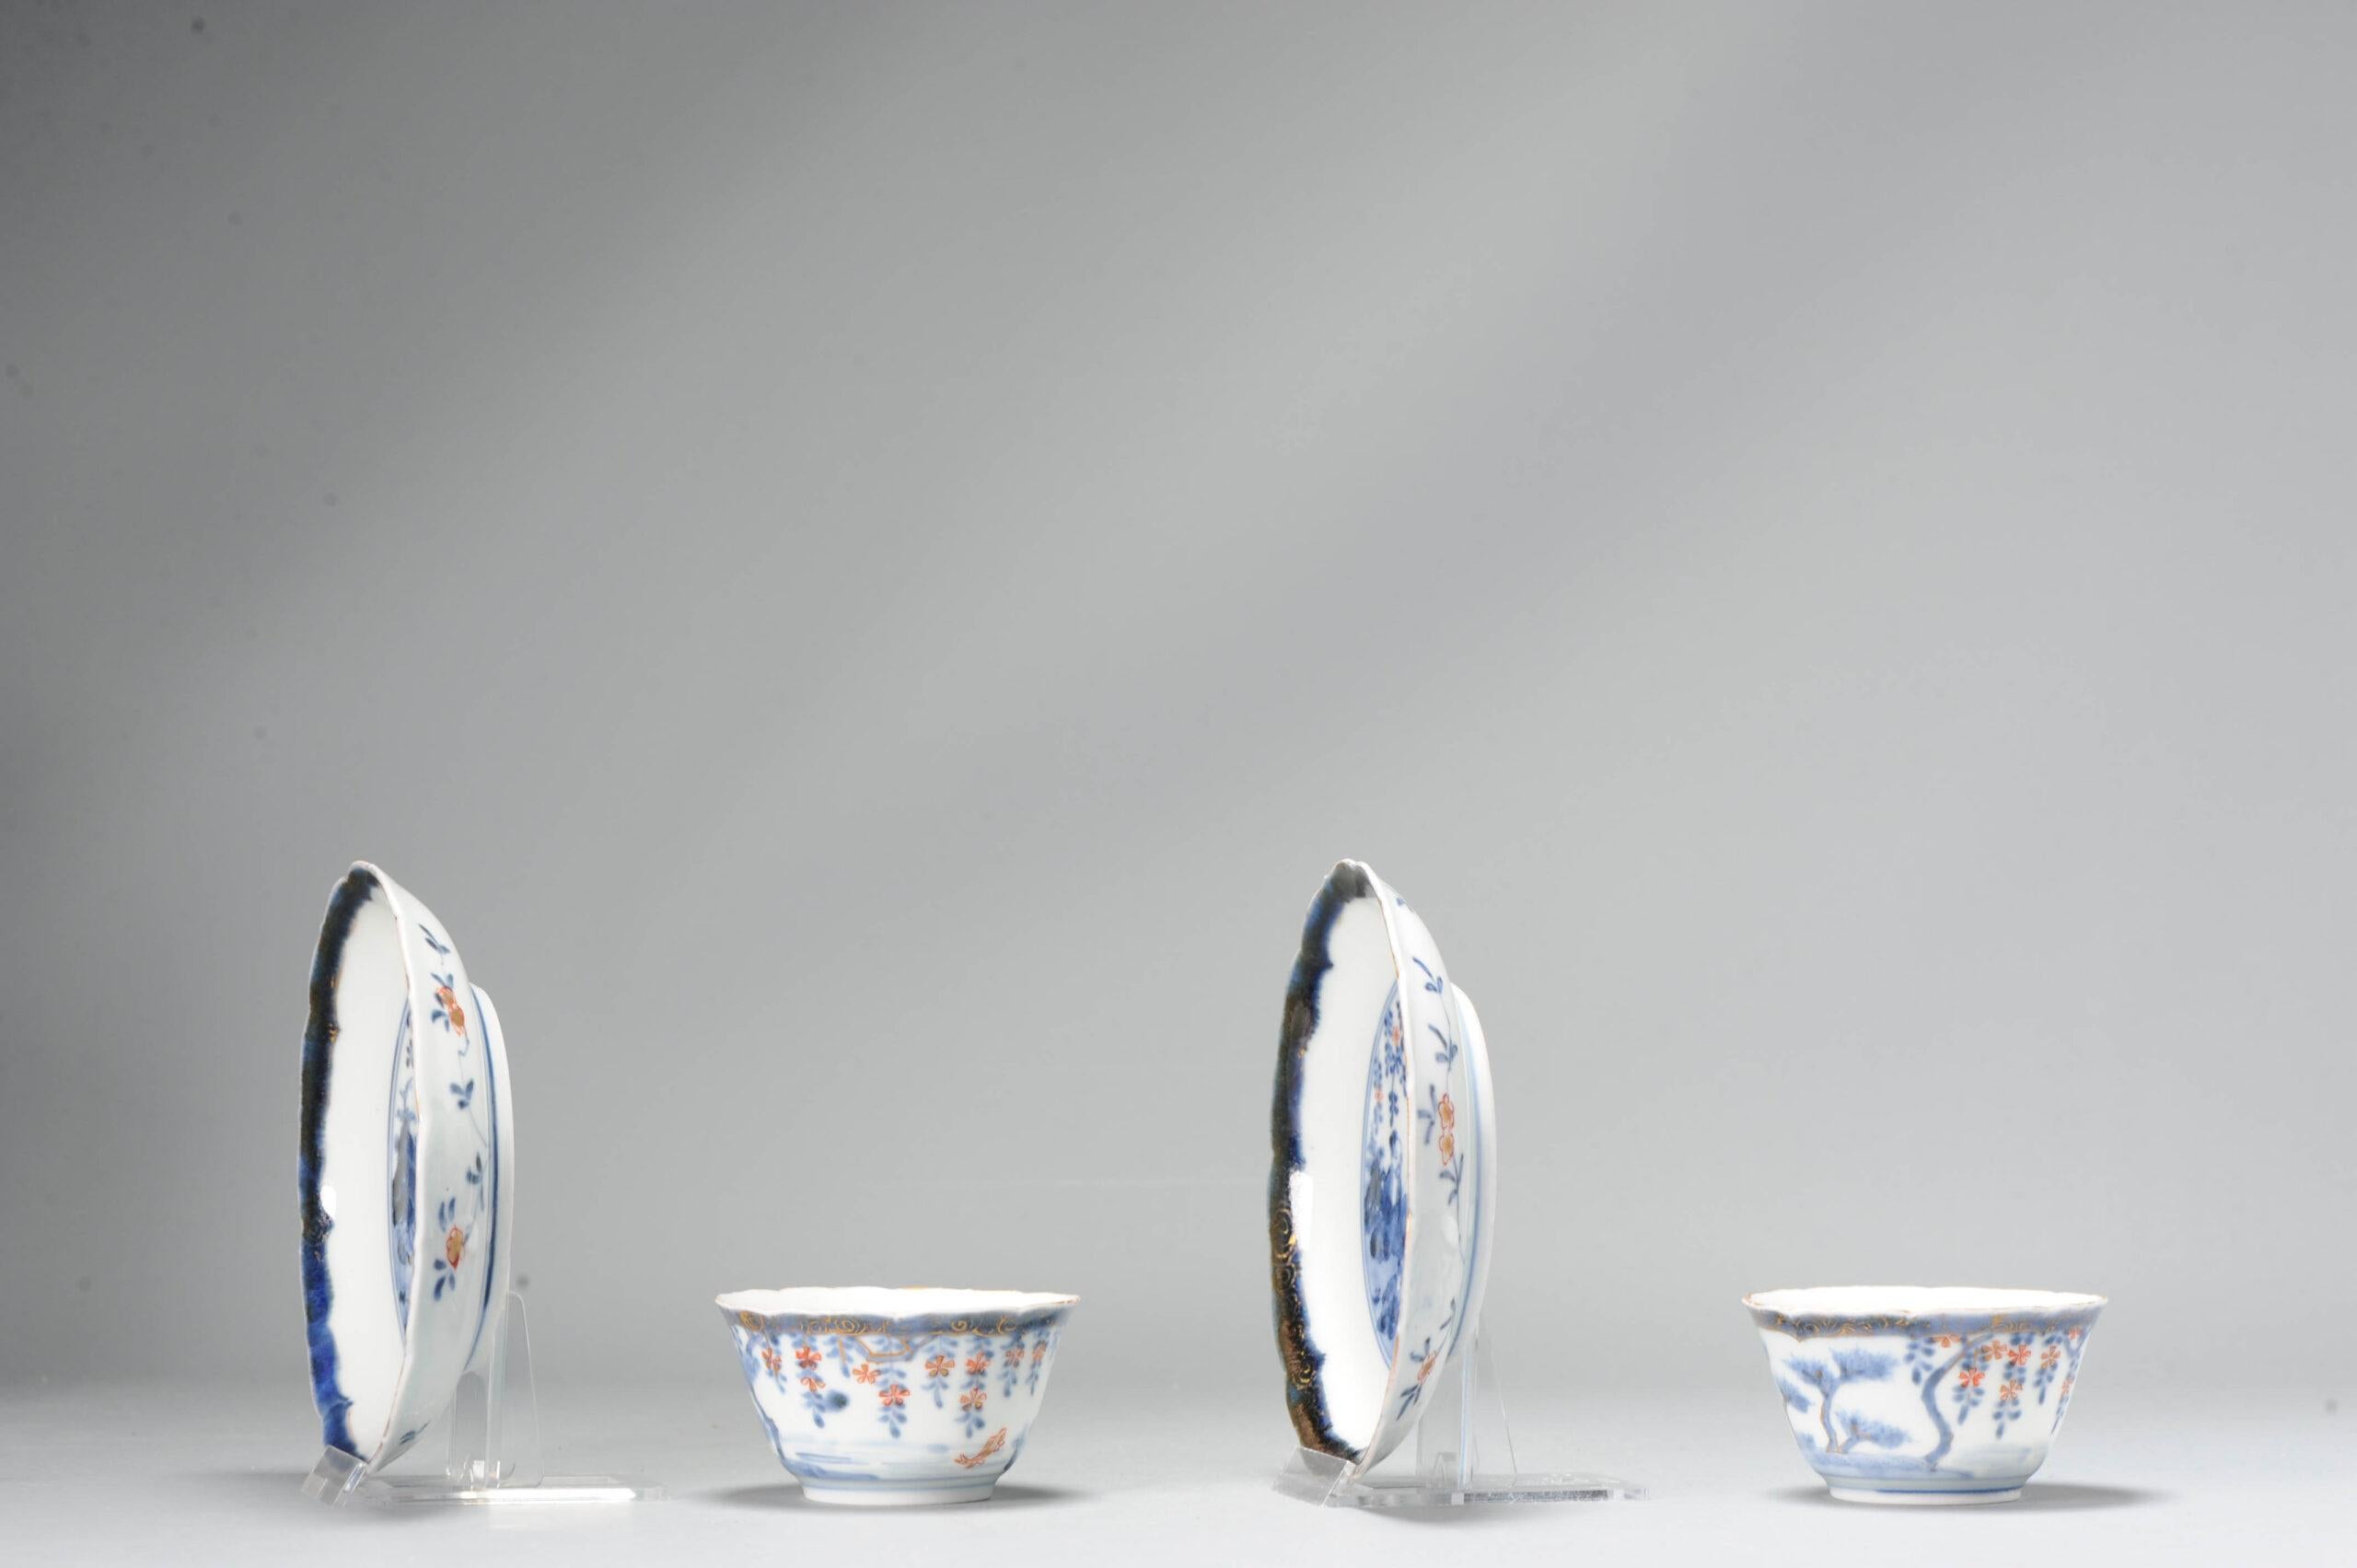 Lovely set with fishermen. In the style of Frederik Van Frytom.

Very thinly potted.

Additional information:
Material: Porcelain & Pottery
Region of Origin: Japan 
Period: 17th Century
Age: 17th century
Condition: Perfect
Dimension: Ø 12.6 x 25 H cm